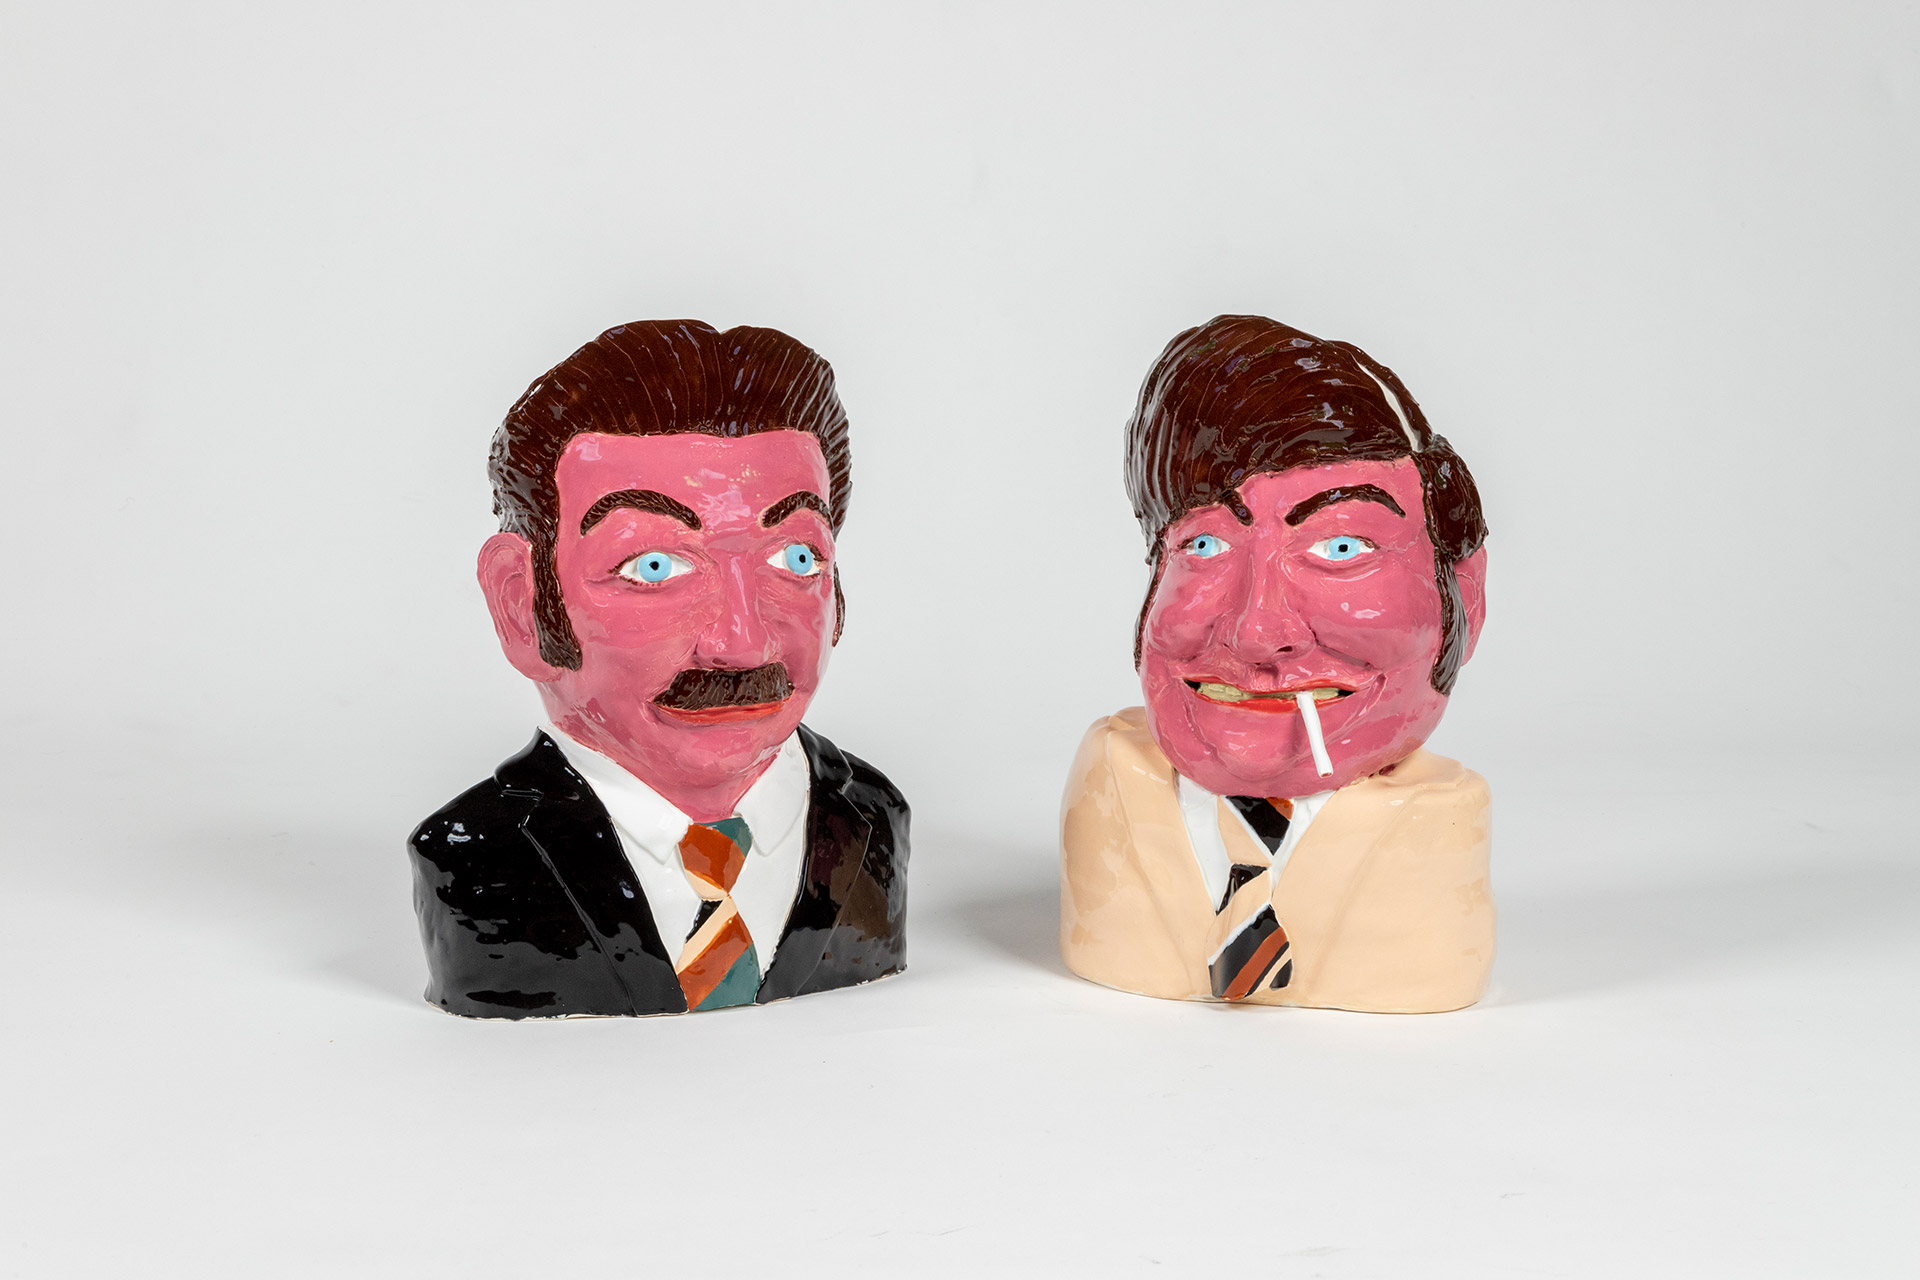 Paul Rayner, Ken & Ken 2004. Collection of The Dowse Art Museum, purchased 2004. 